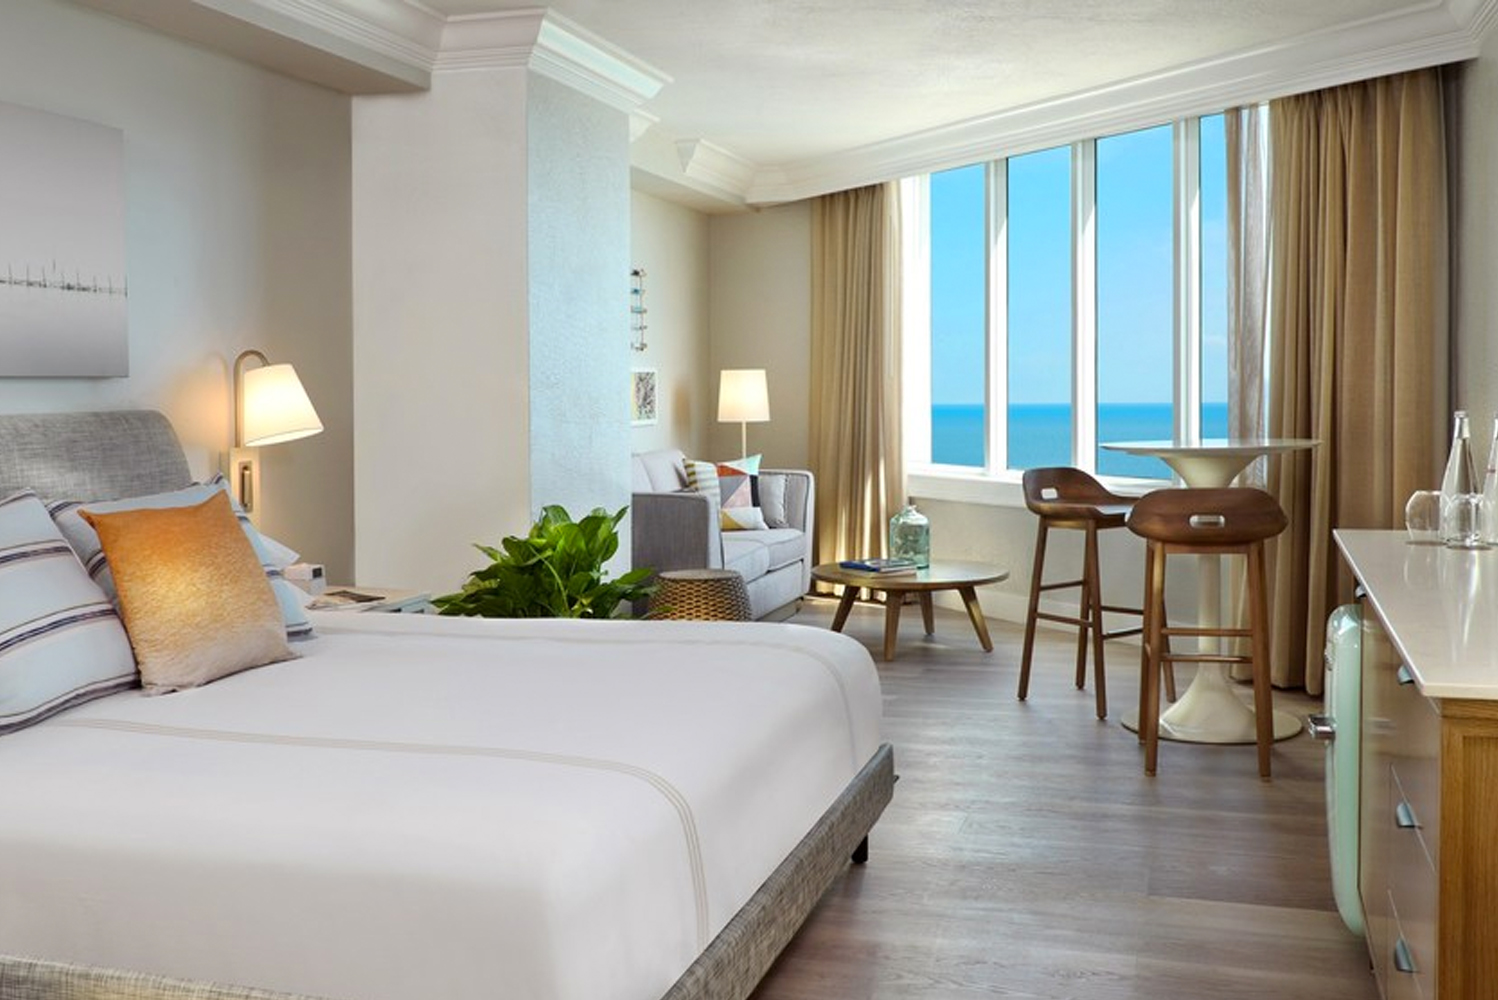 Pelican Grand Beach Resort completed its 7 million guestroom renovation 